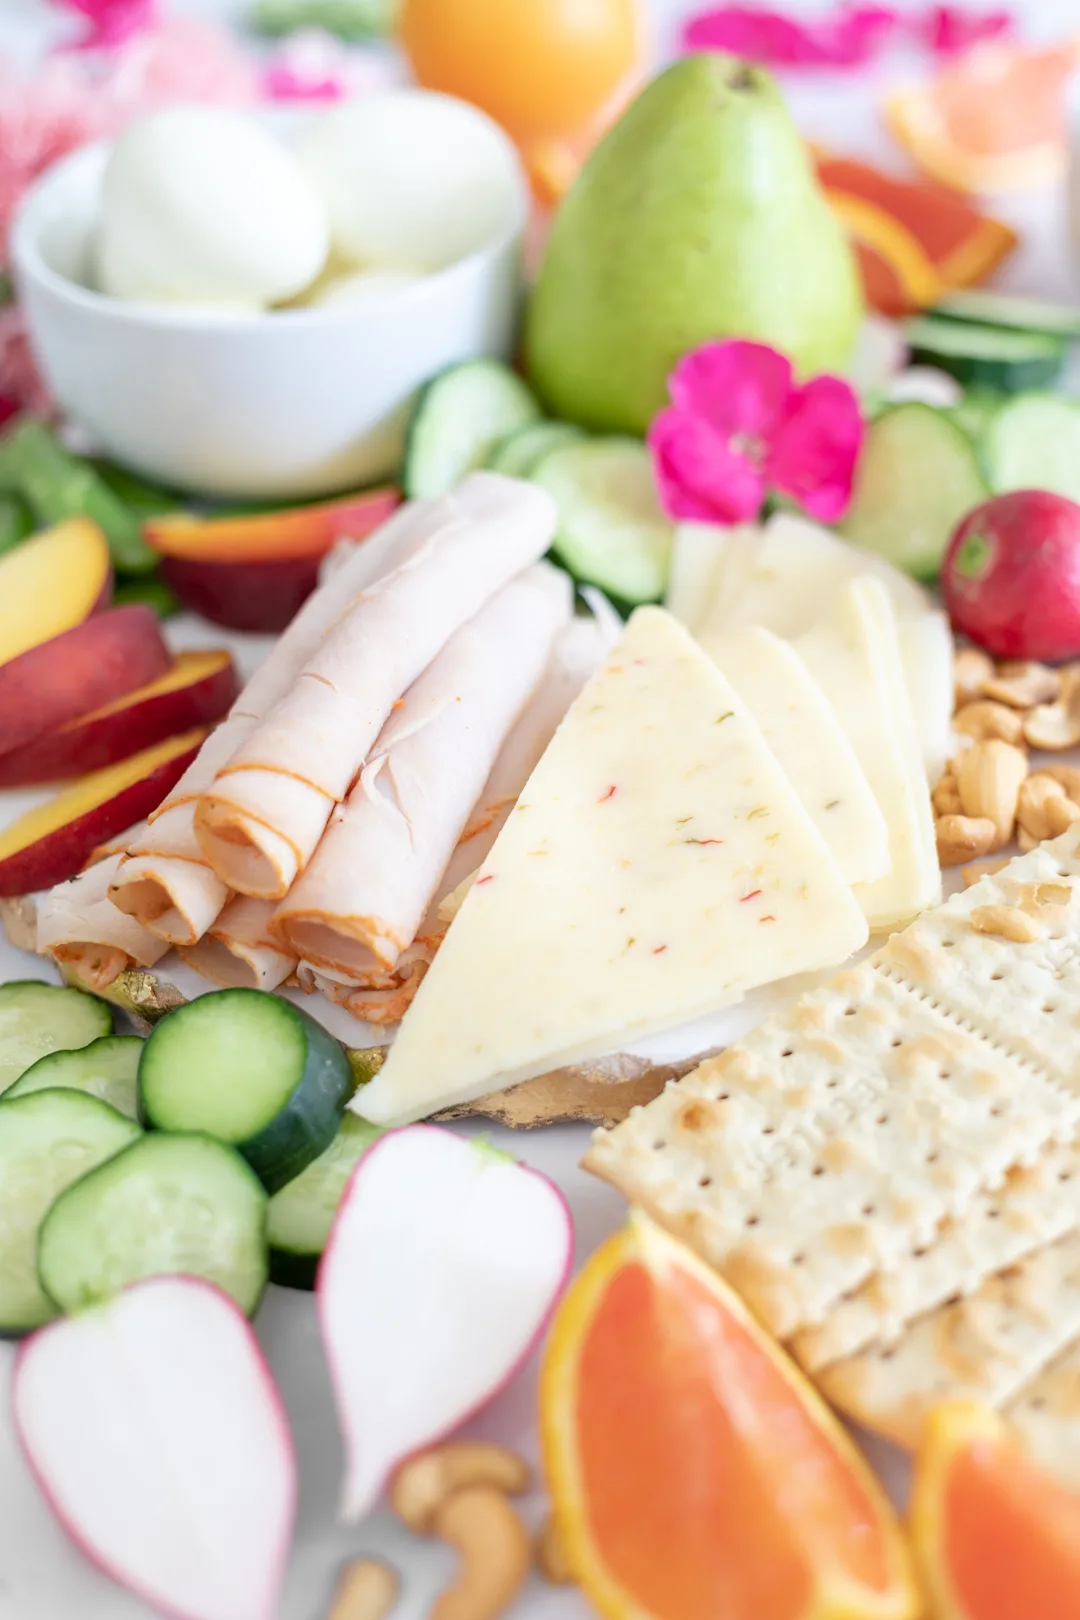 large lunch food spread with cheese slices, turkey, vegetables and crackers